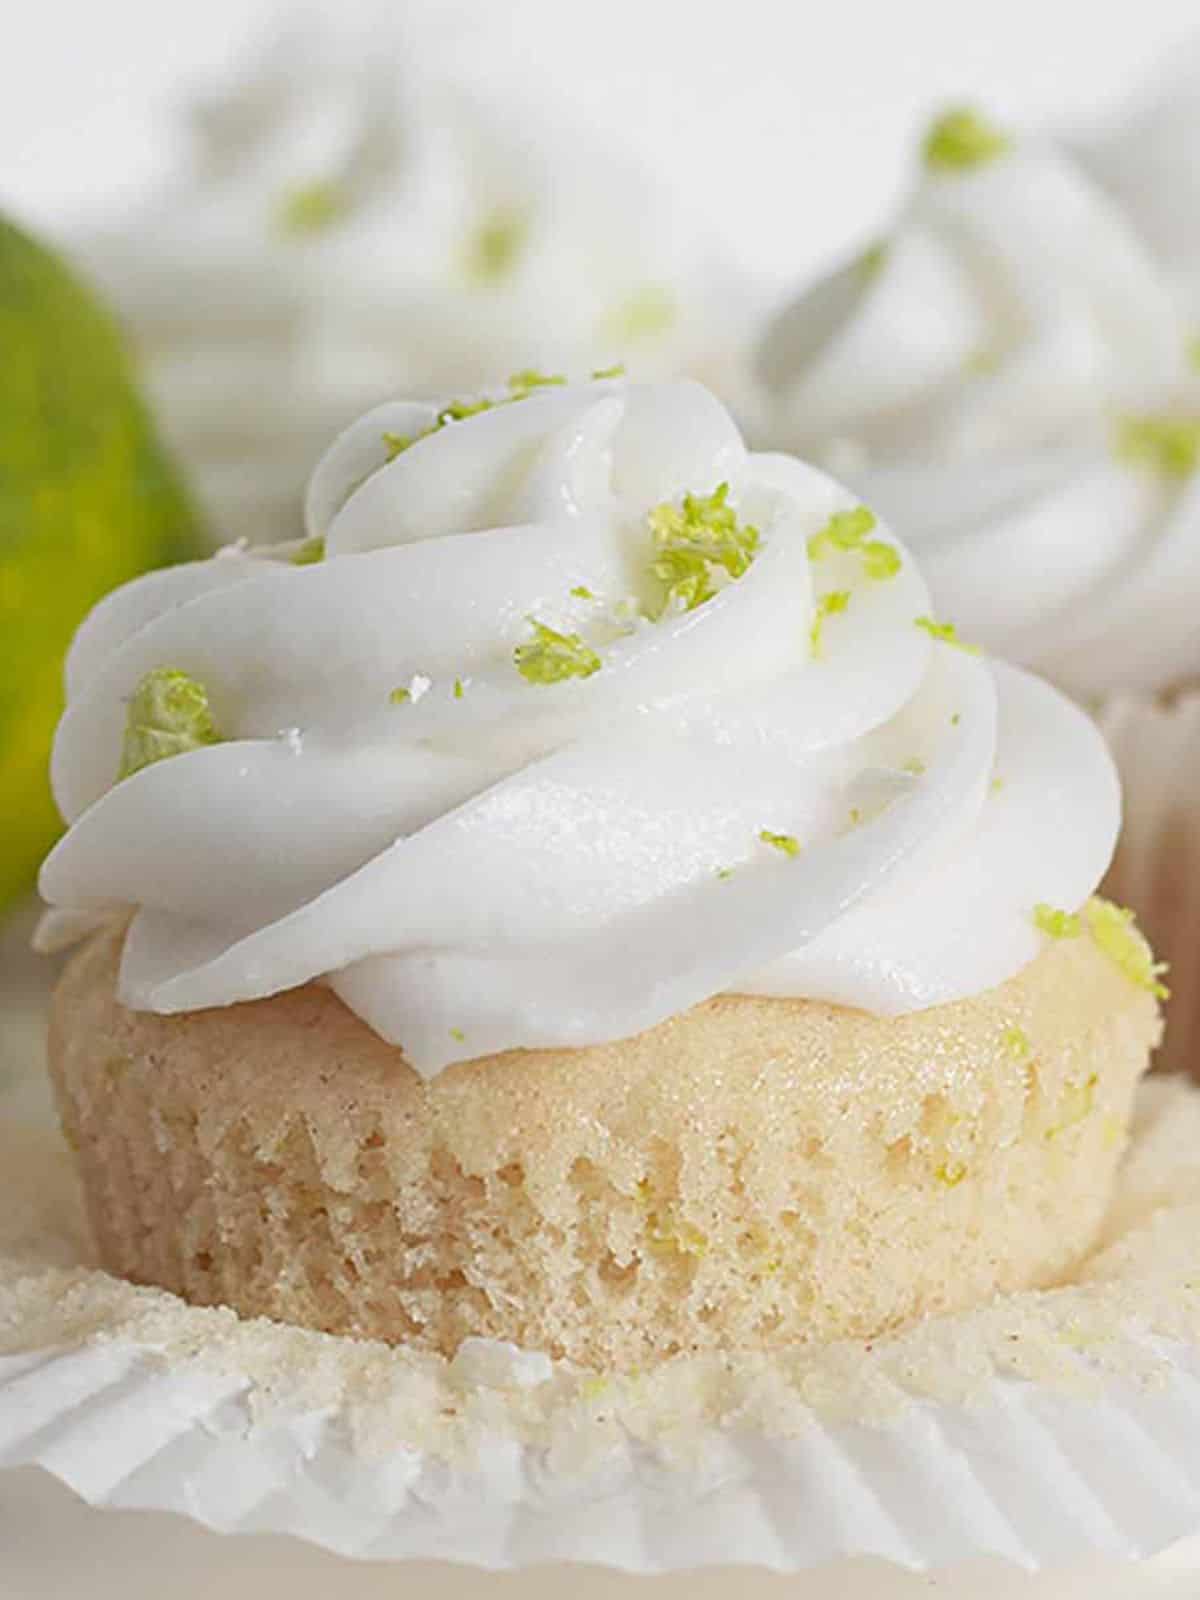 Vegan Coconut Lime Cupcakes with creamy frosting on top.